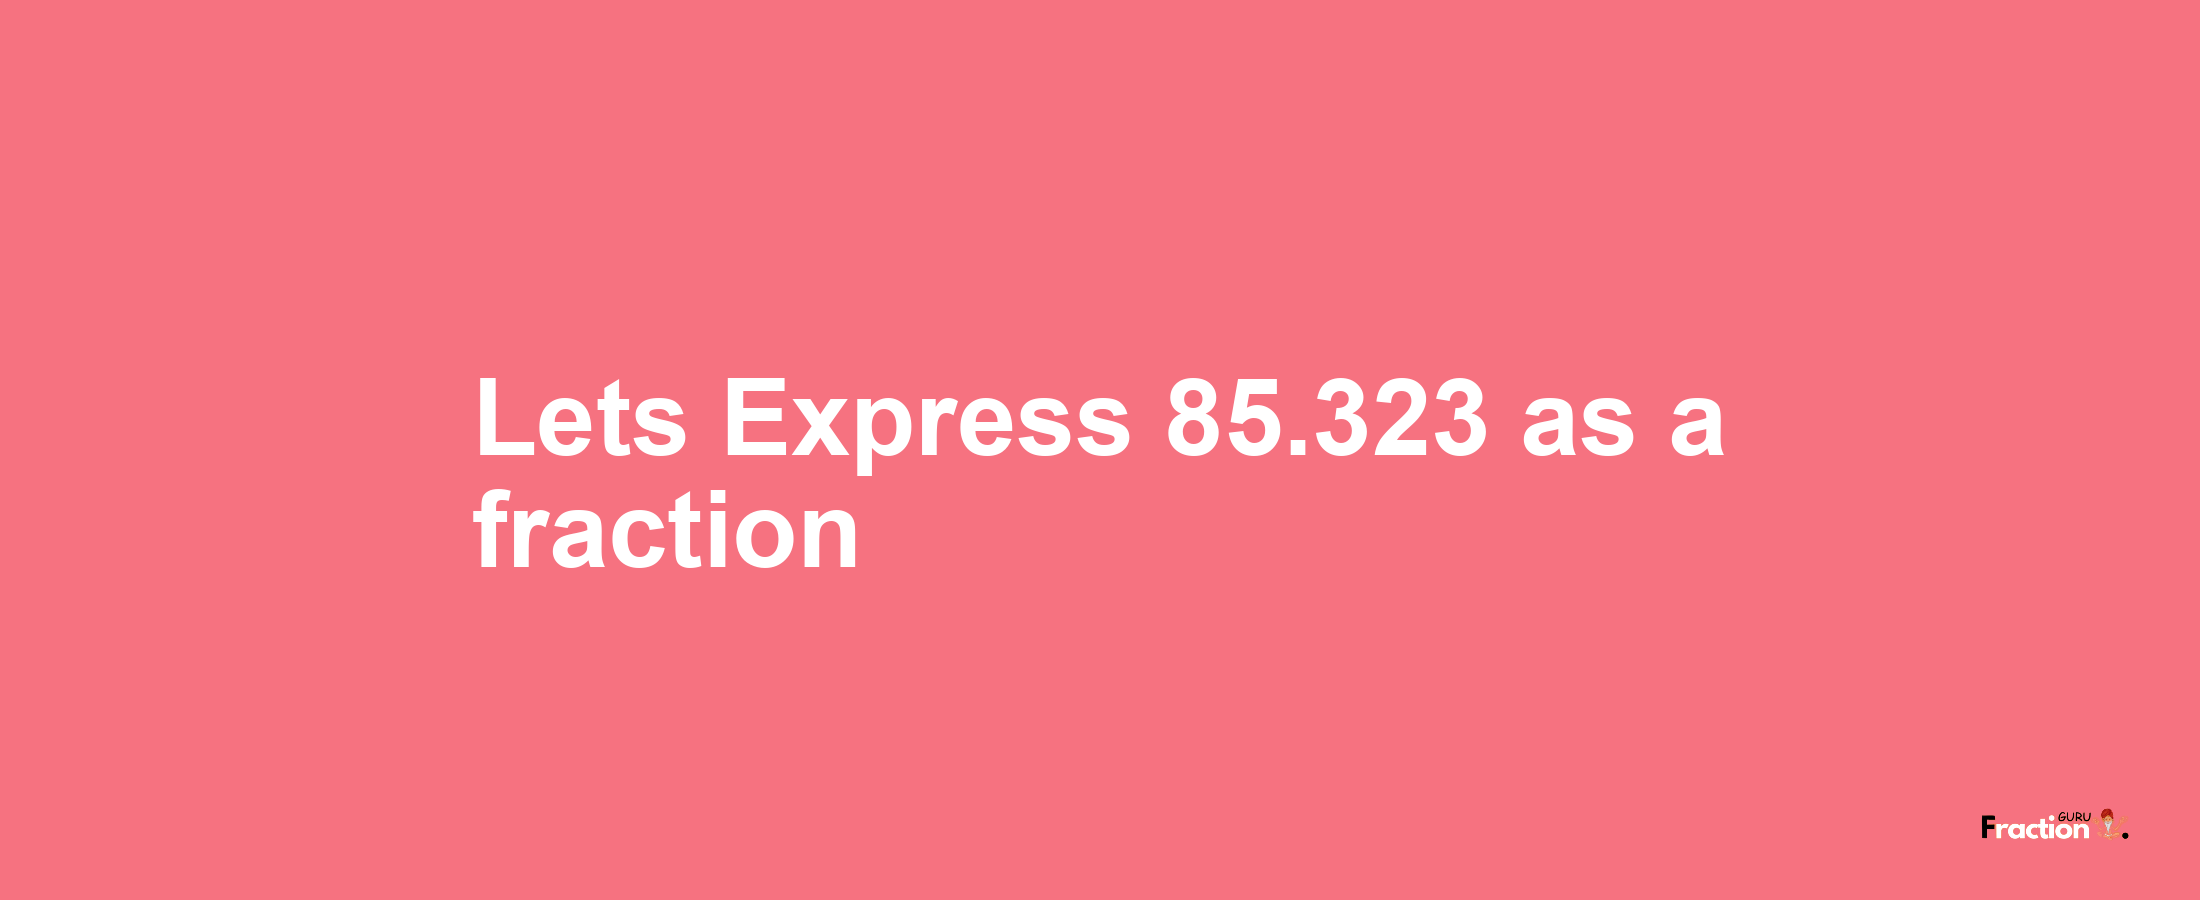 Lets Express 85.323 as afraction